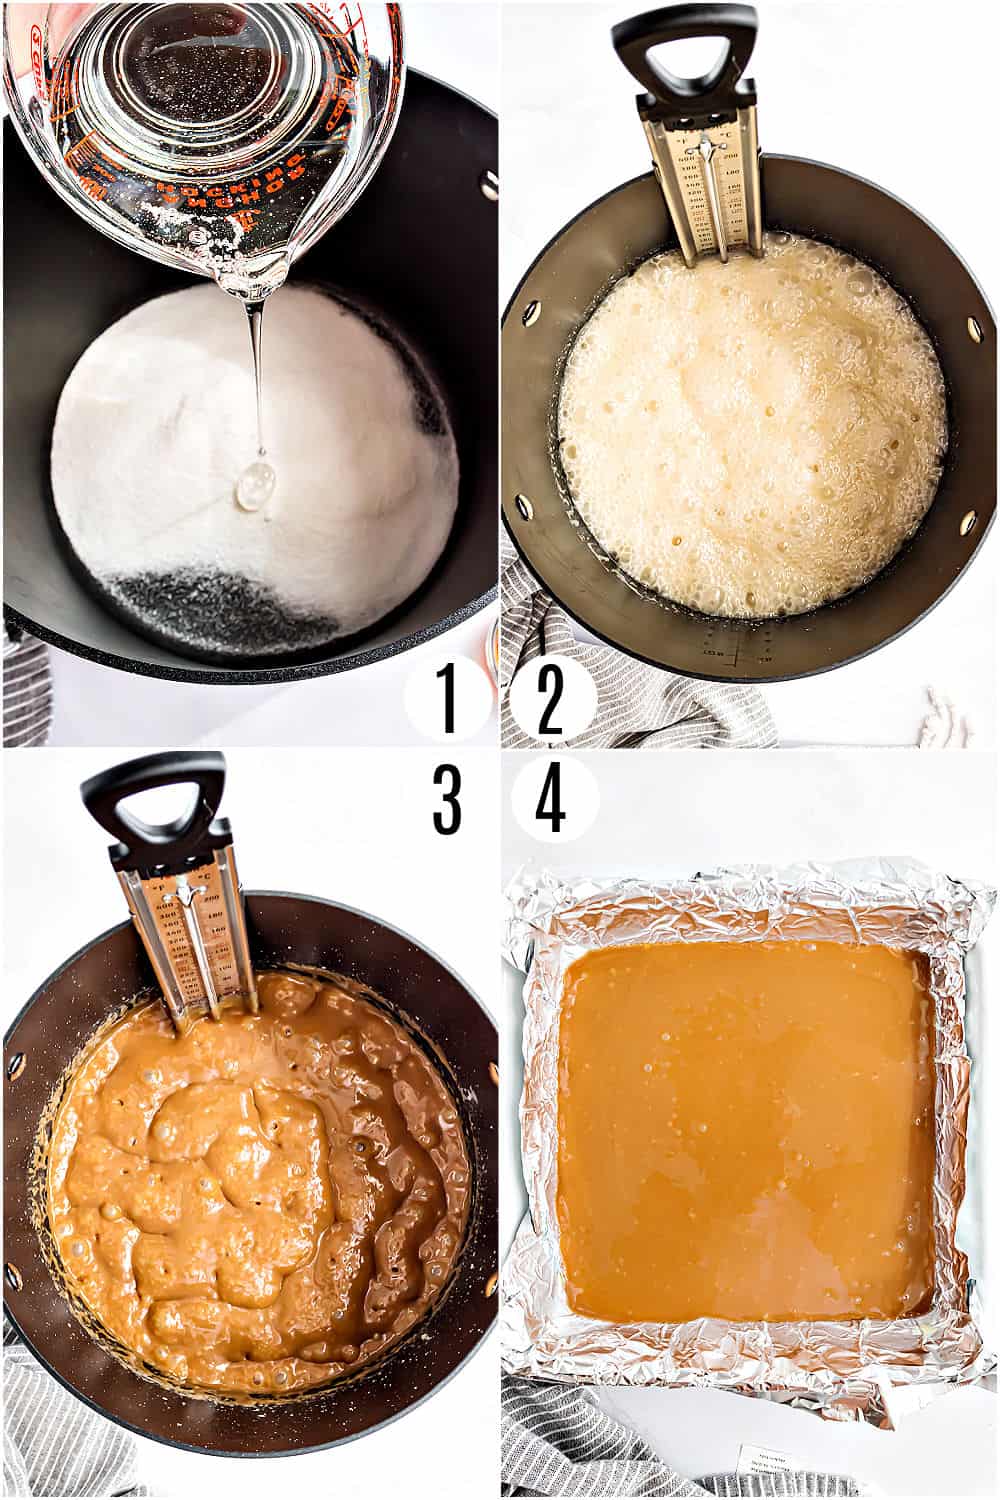 Step by step photos showibg how to make homemade caramels.